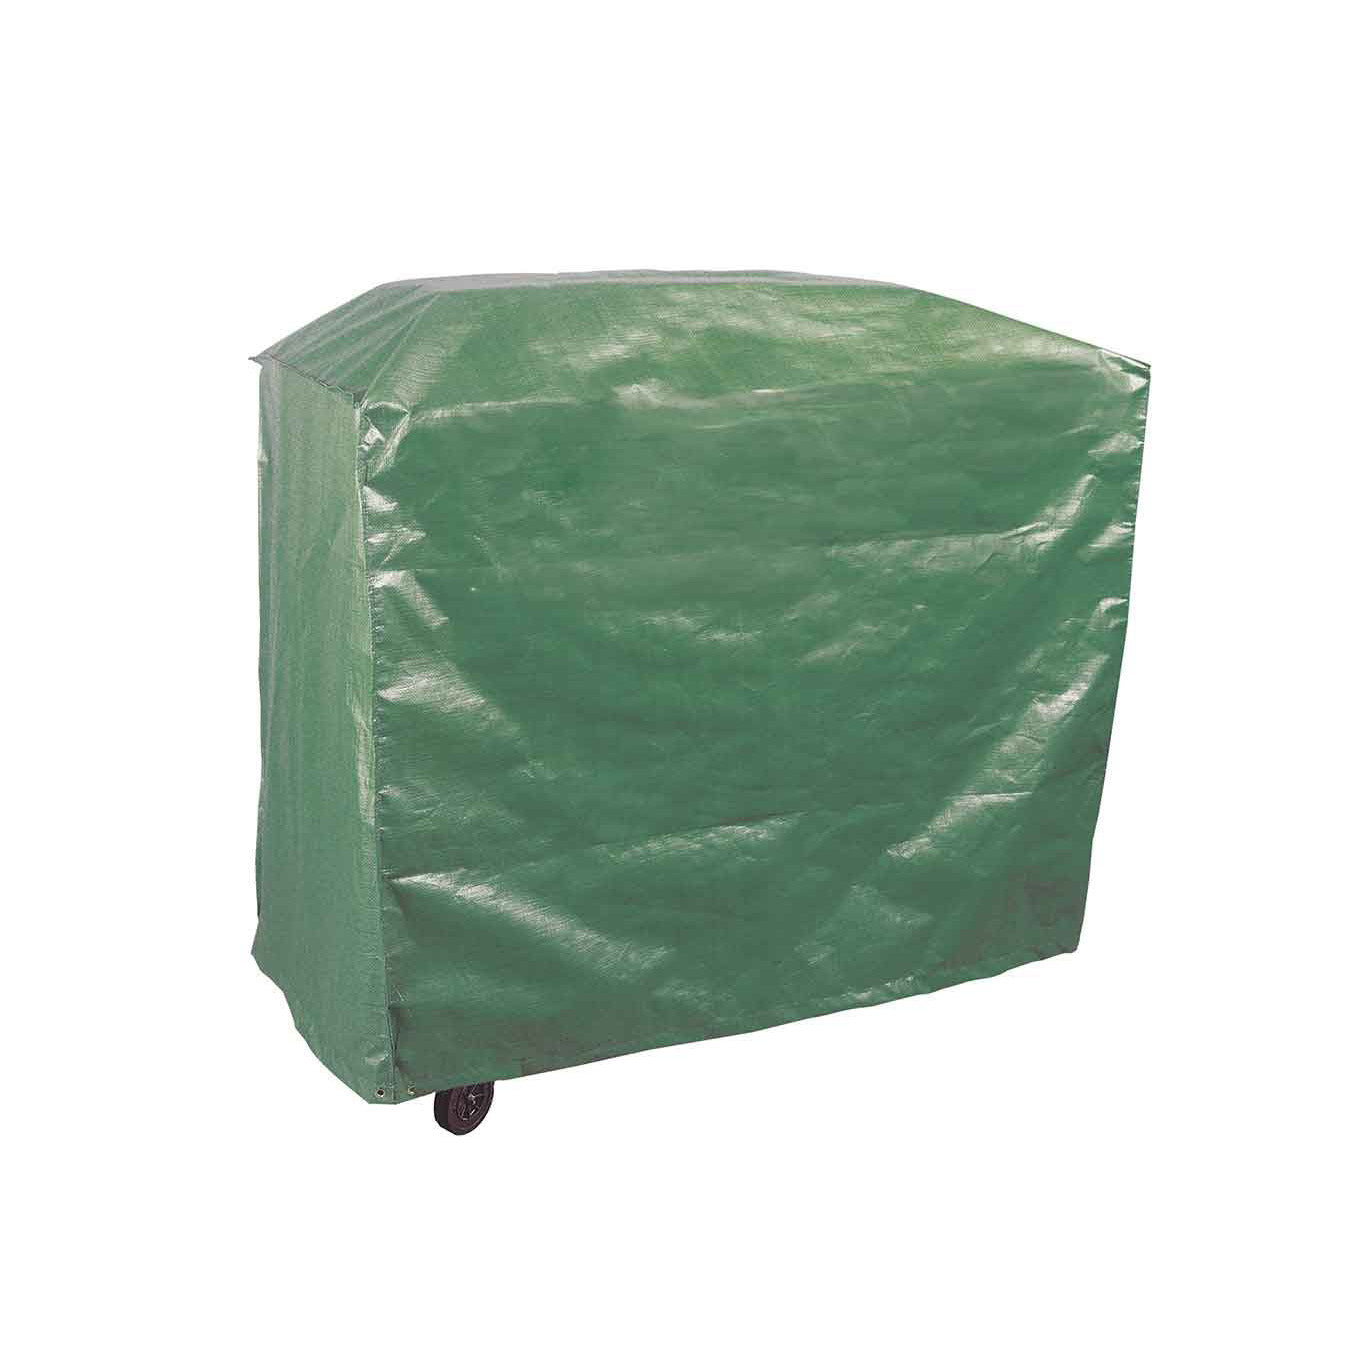 Bosmere Protector 2000 Trolley Barbecue Cover P510